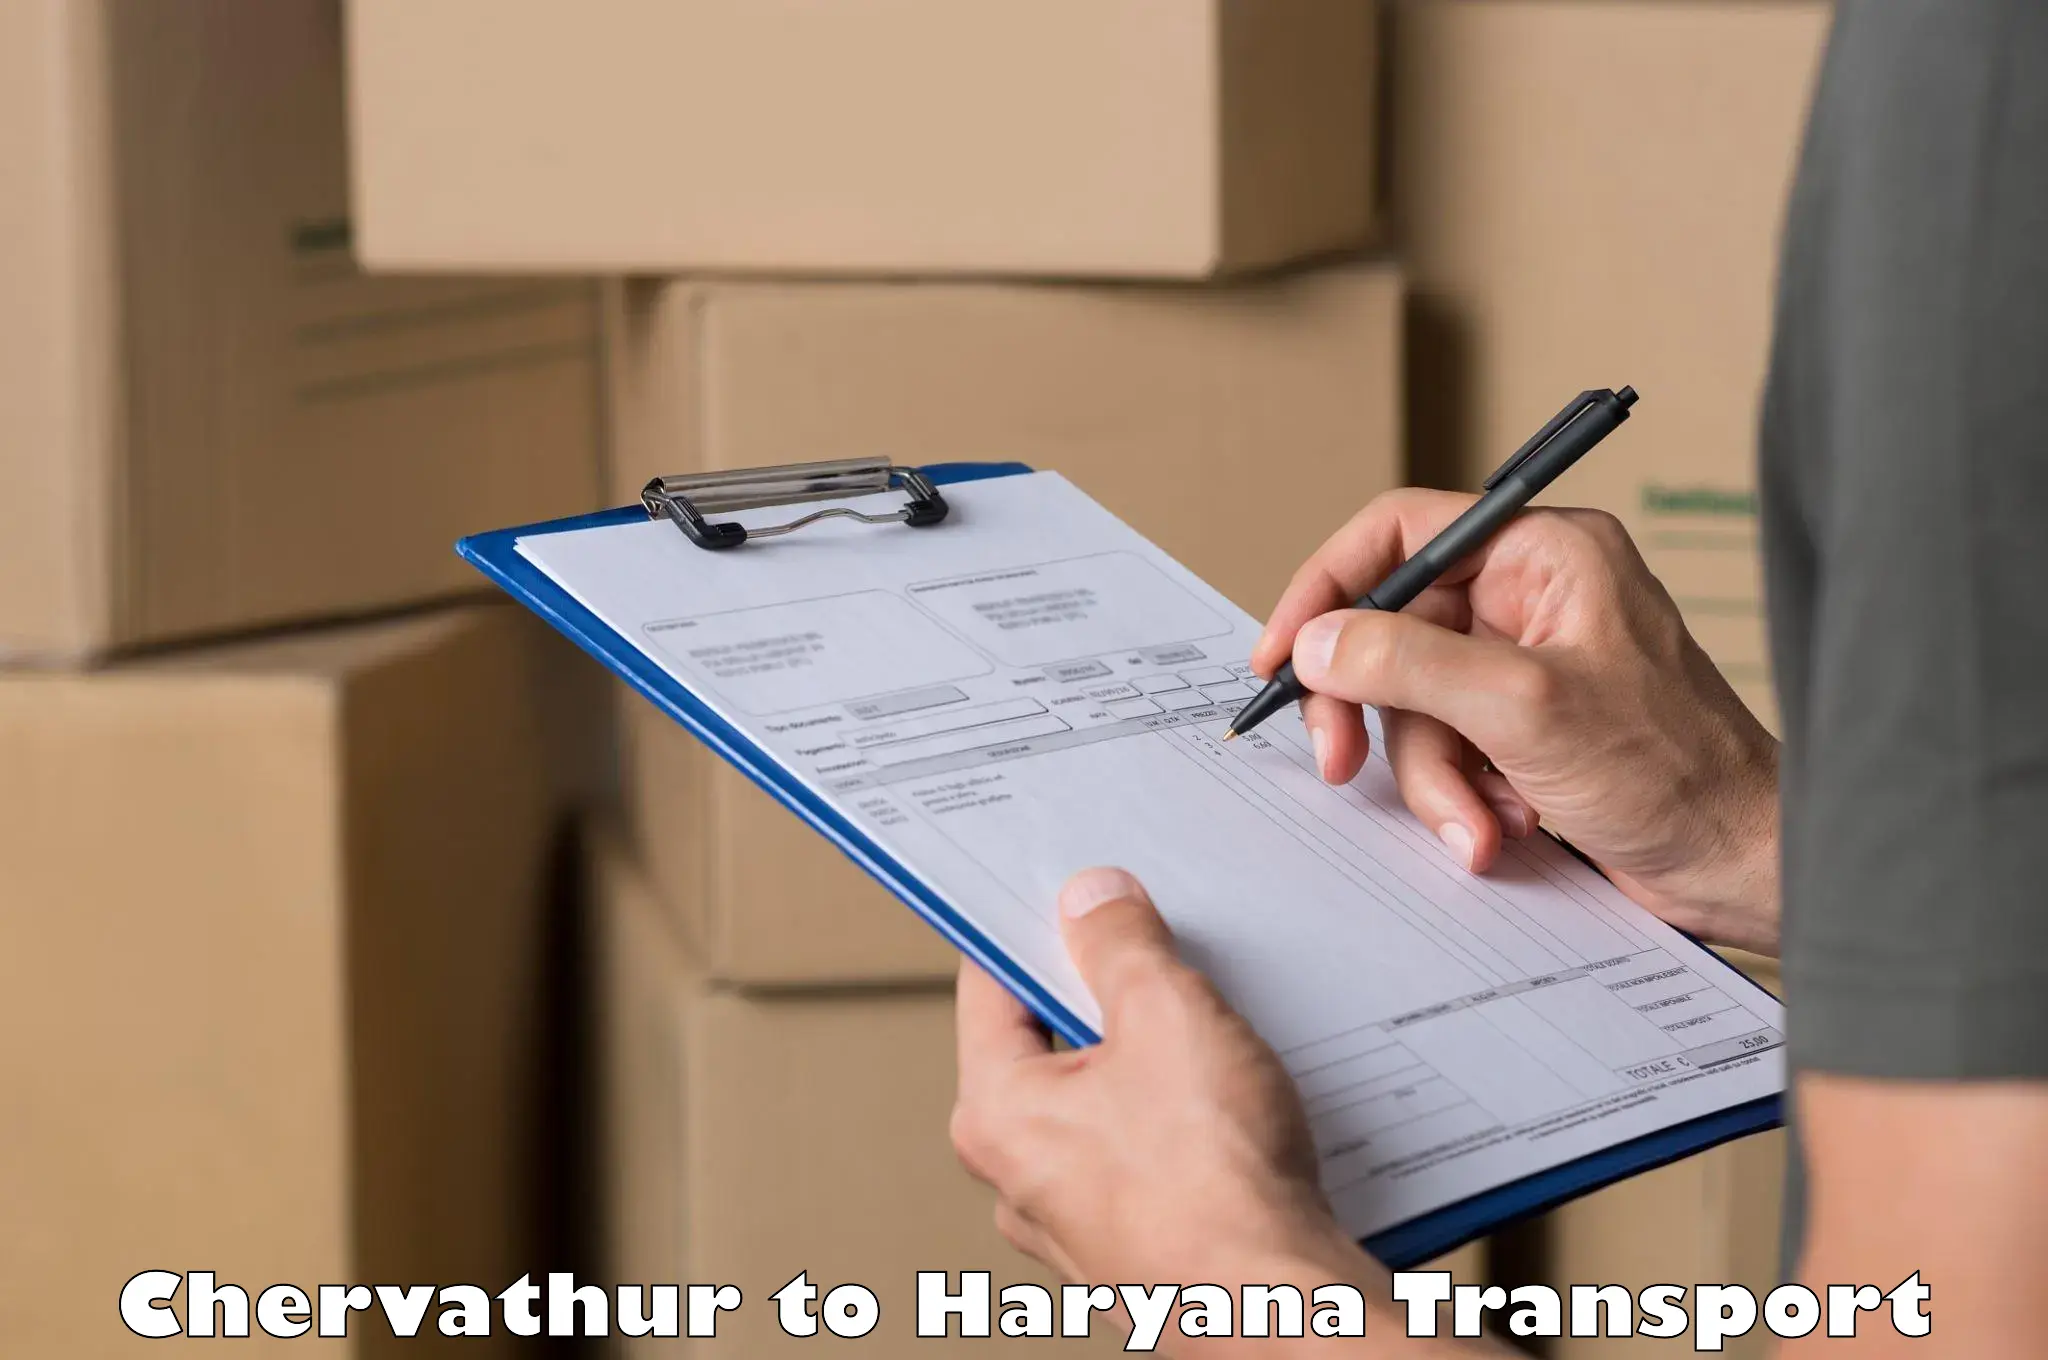 Furniture transport service in Chervathur to Siwani